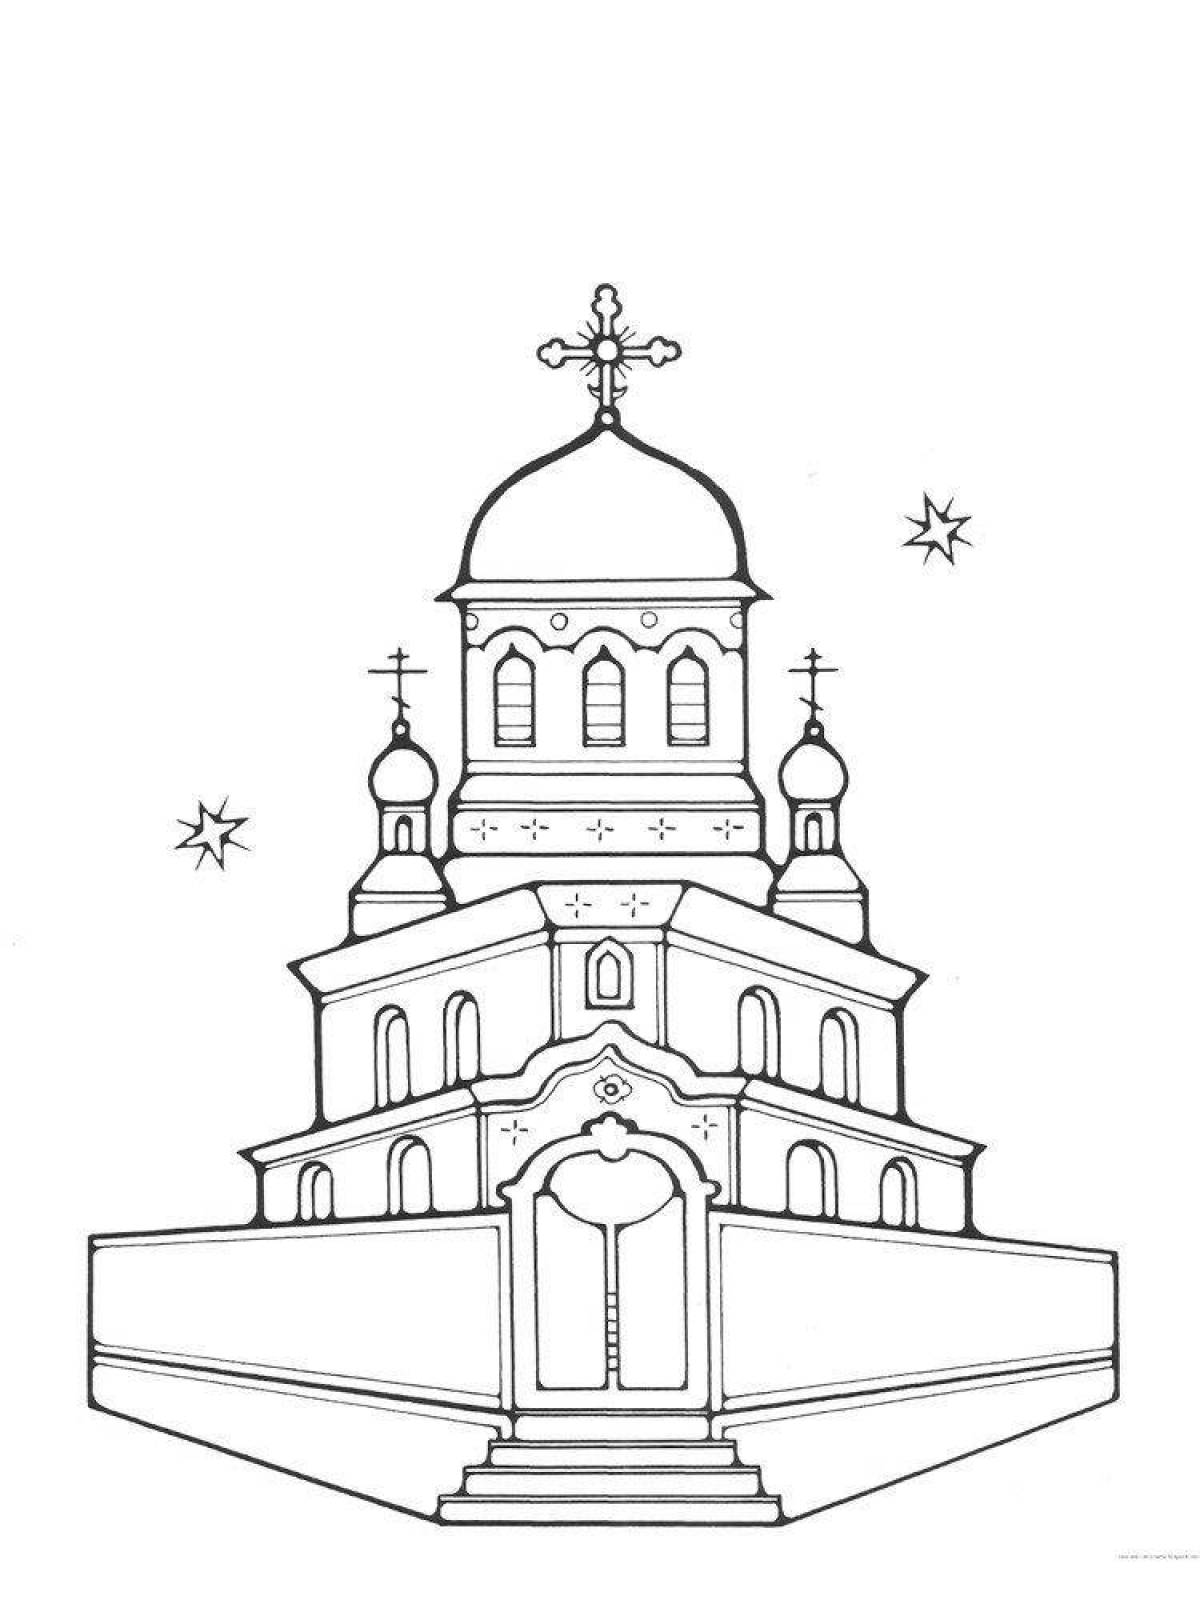 Luxury coloring pages temples and churches for kids